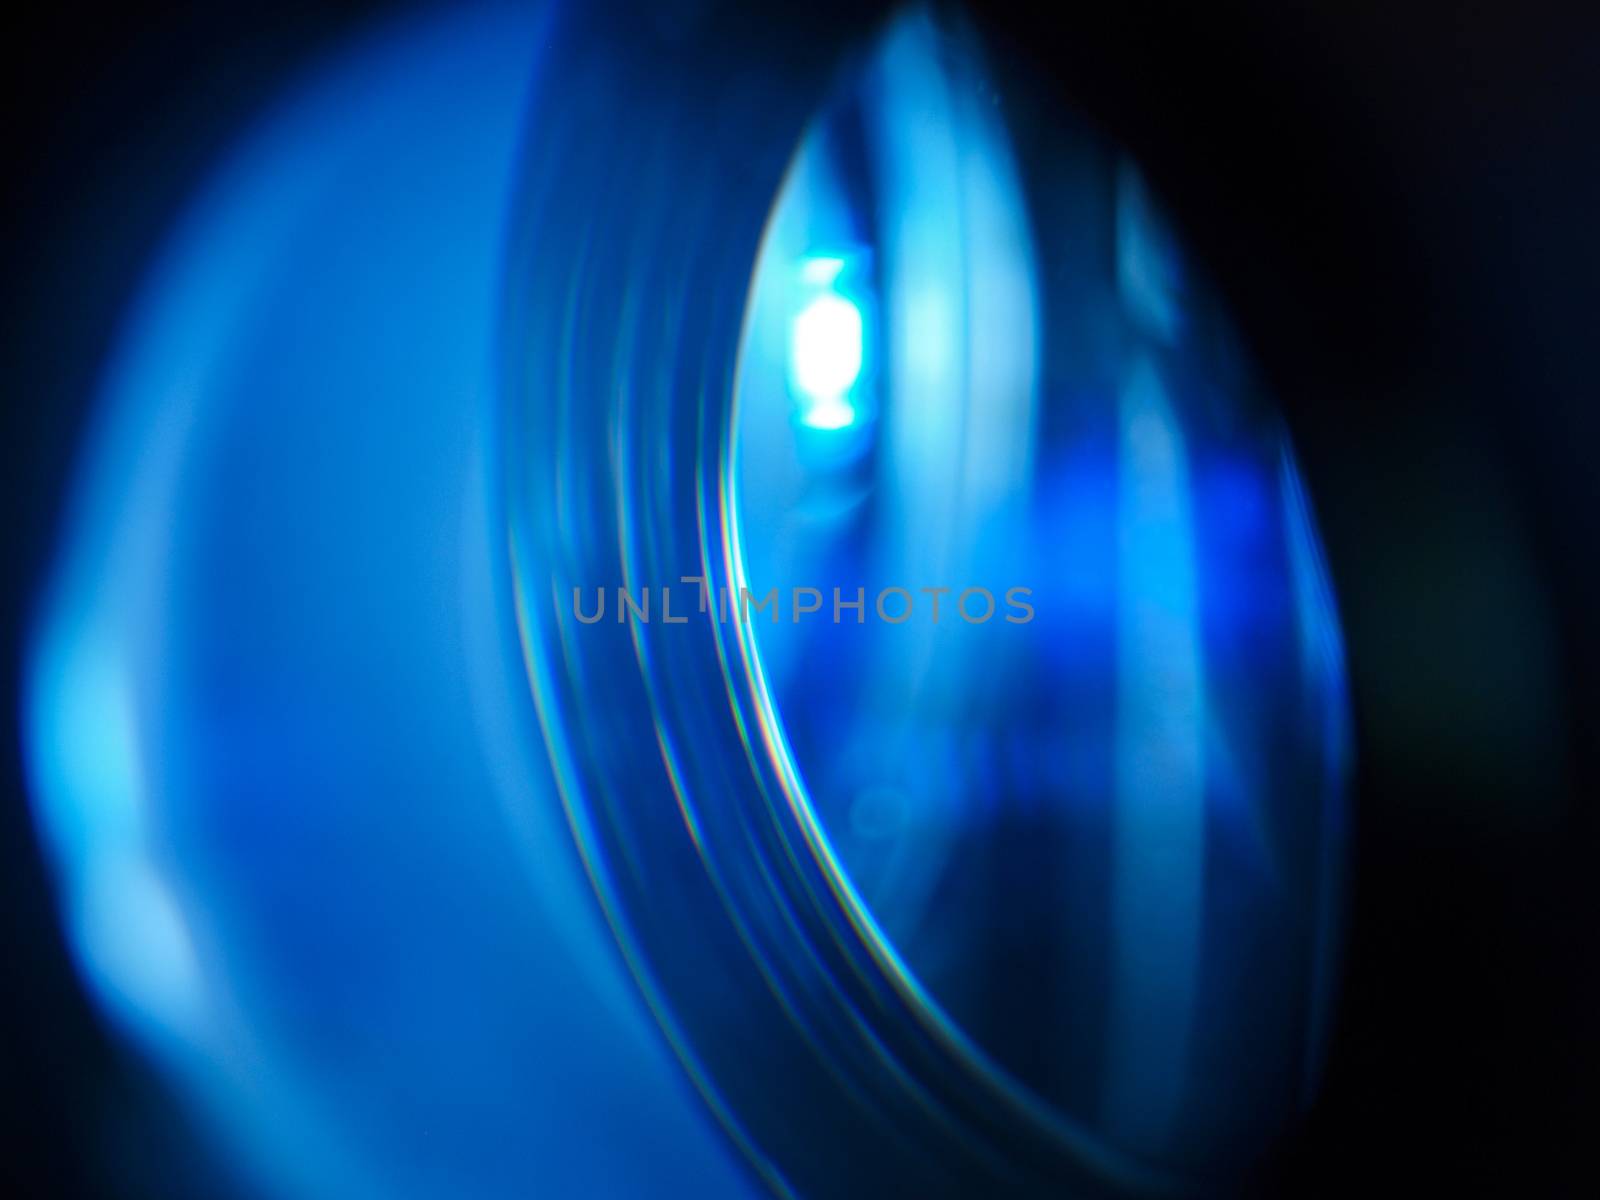 Led projector lens close up. by GraffiTimi